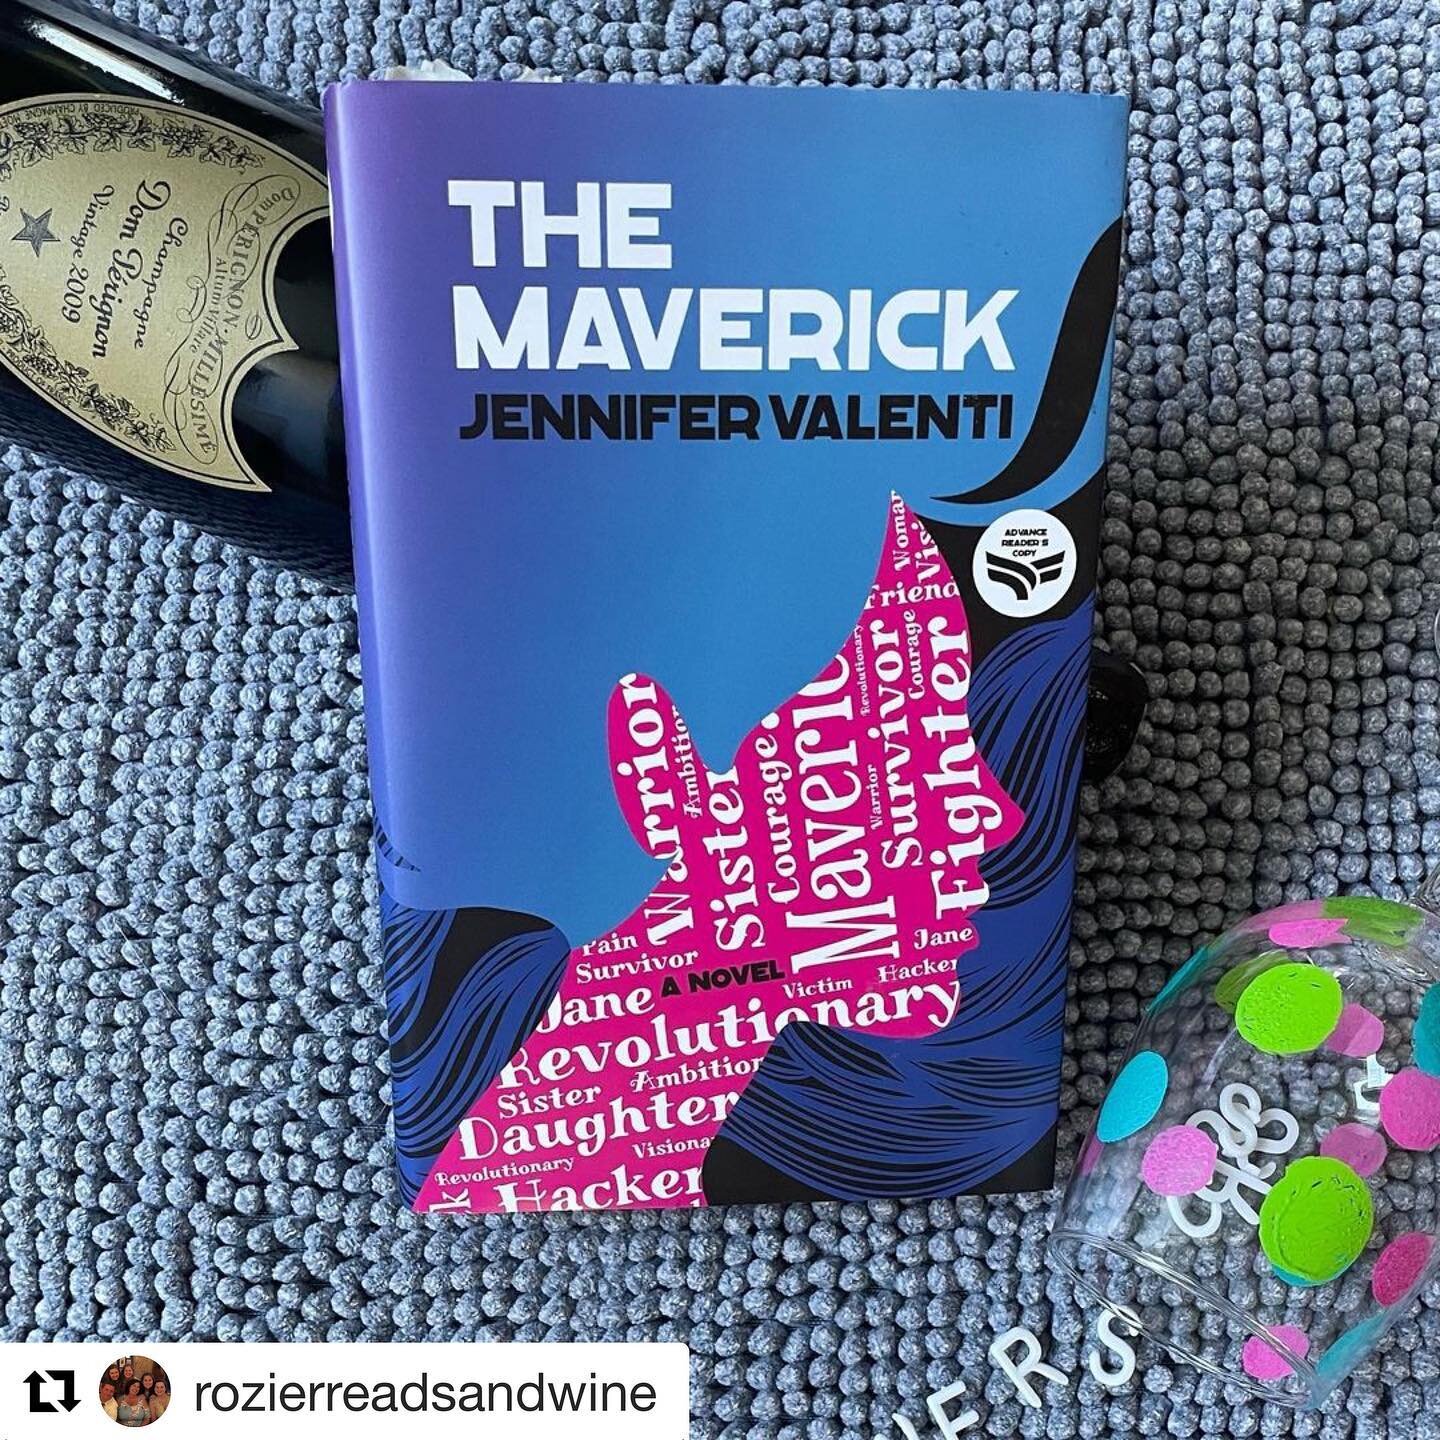 I love when readers just get it. 🥰 This review made me smile after a tough week. #Repost @rozierreadsandwine
・・・
Today is my @katerockbooktours for The Maverick by @jen.valenti 
First of all let me say the goodies that came with this book were so wo